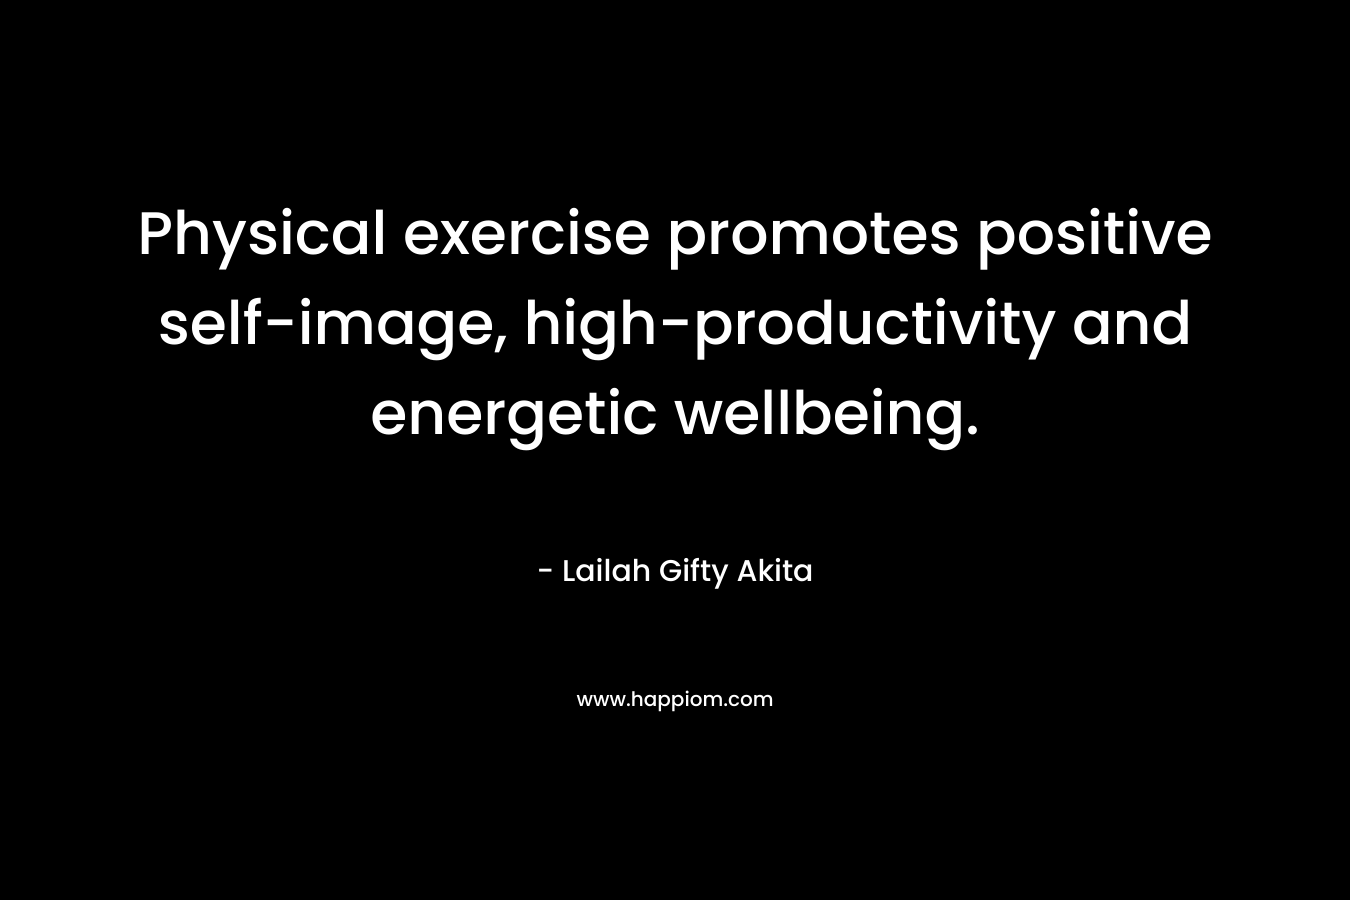 Physical exercise promotes positive self-image, high-productivity and energetic wellbeing.